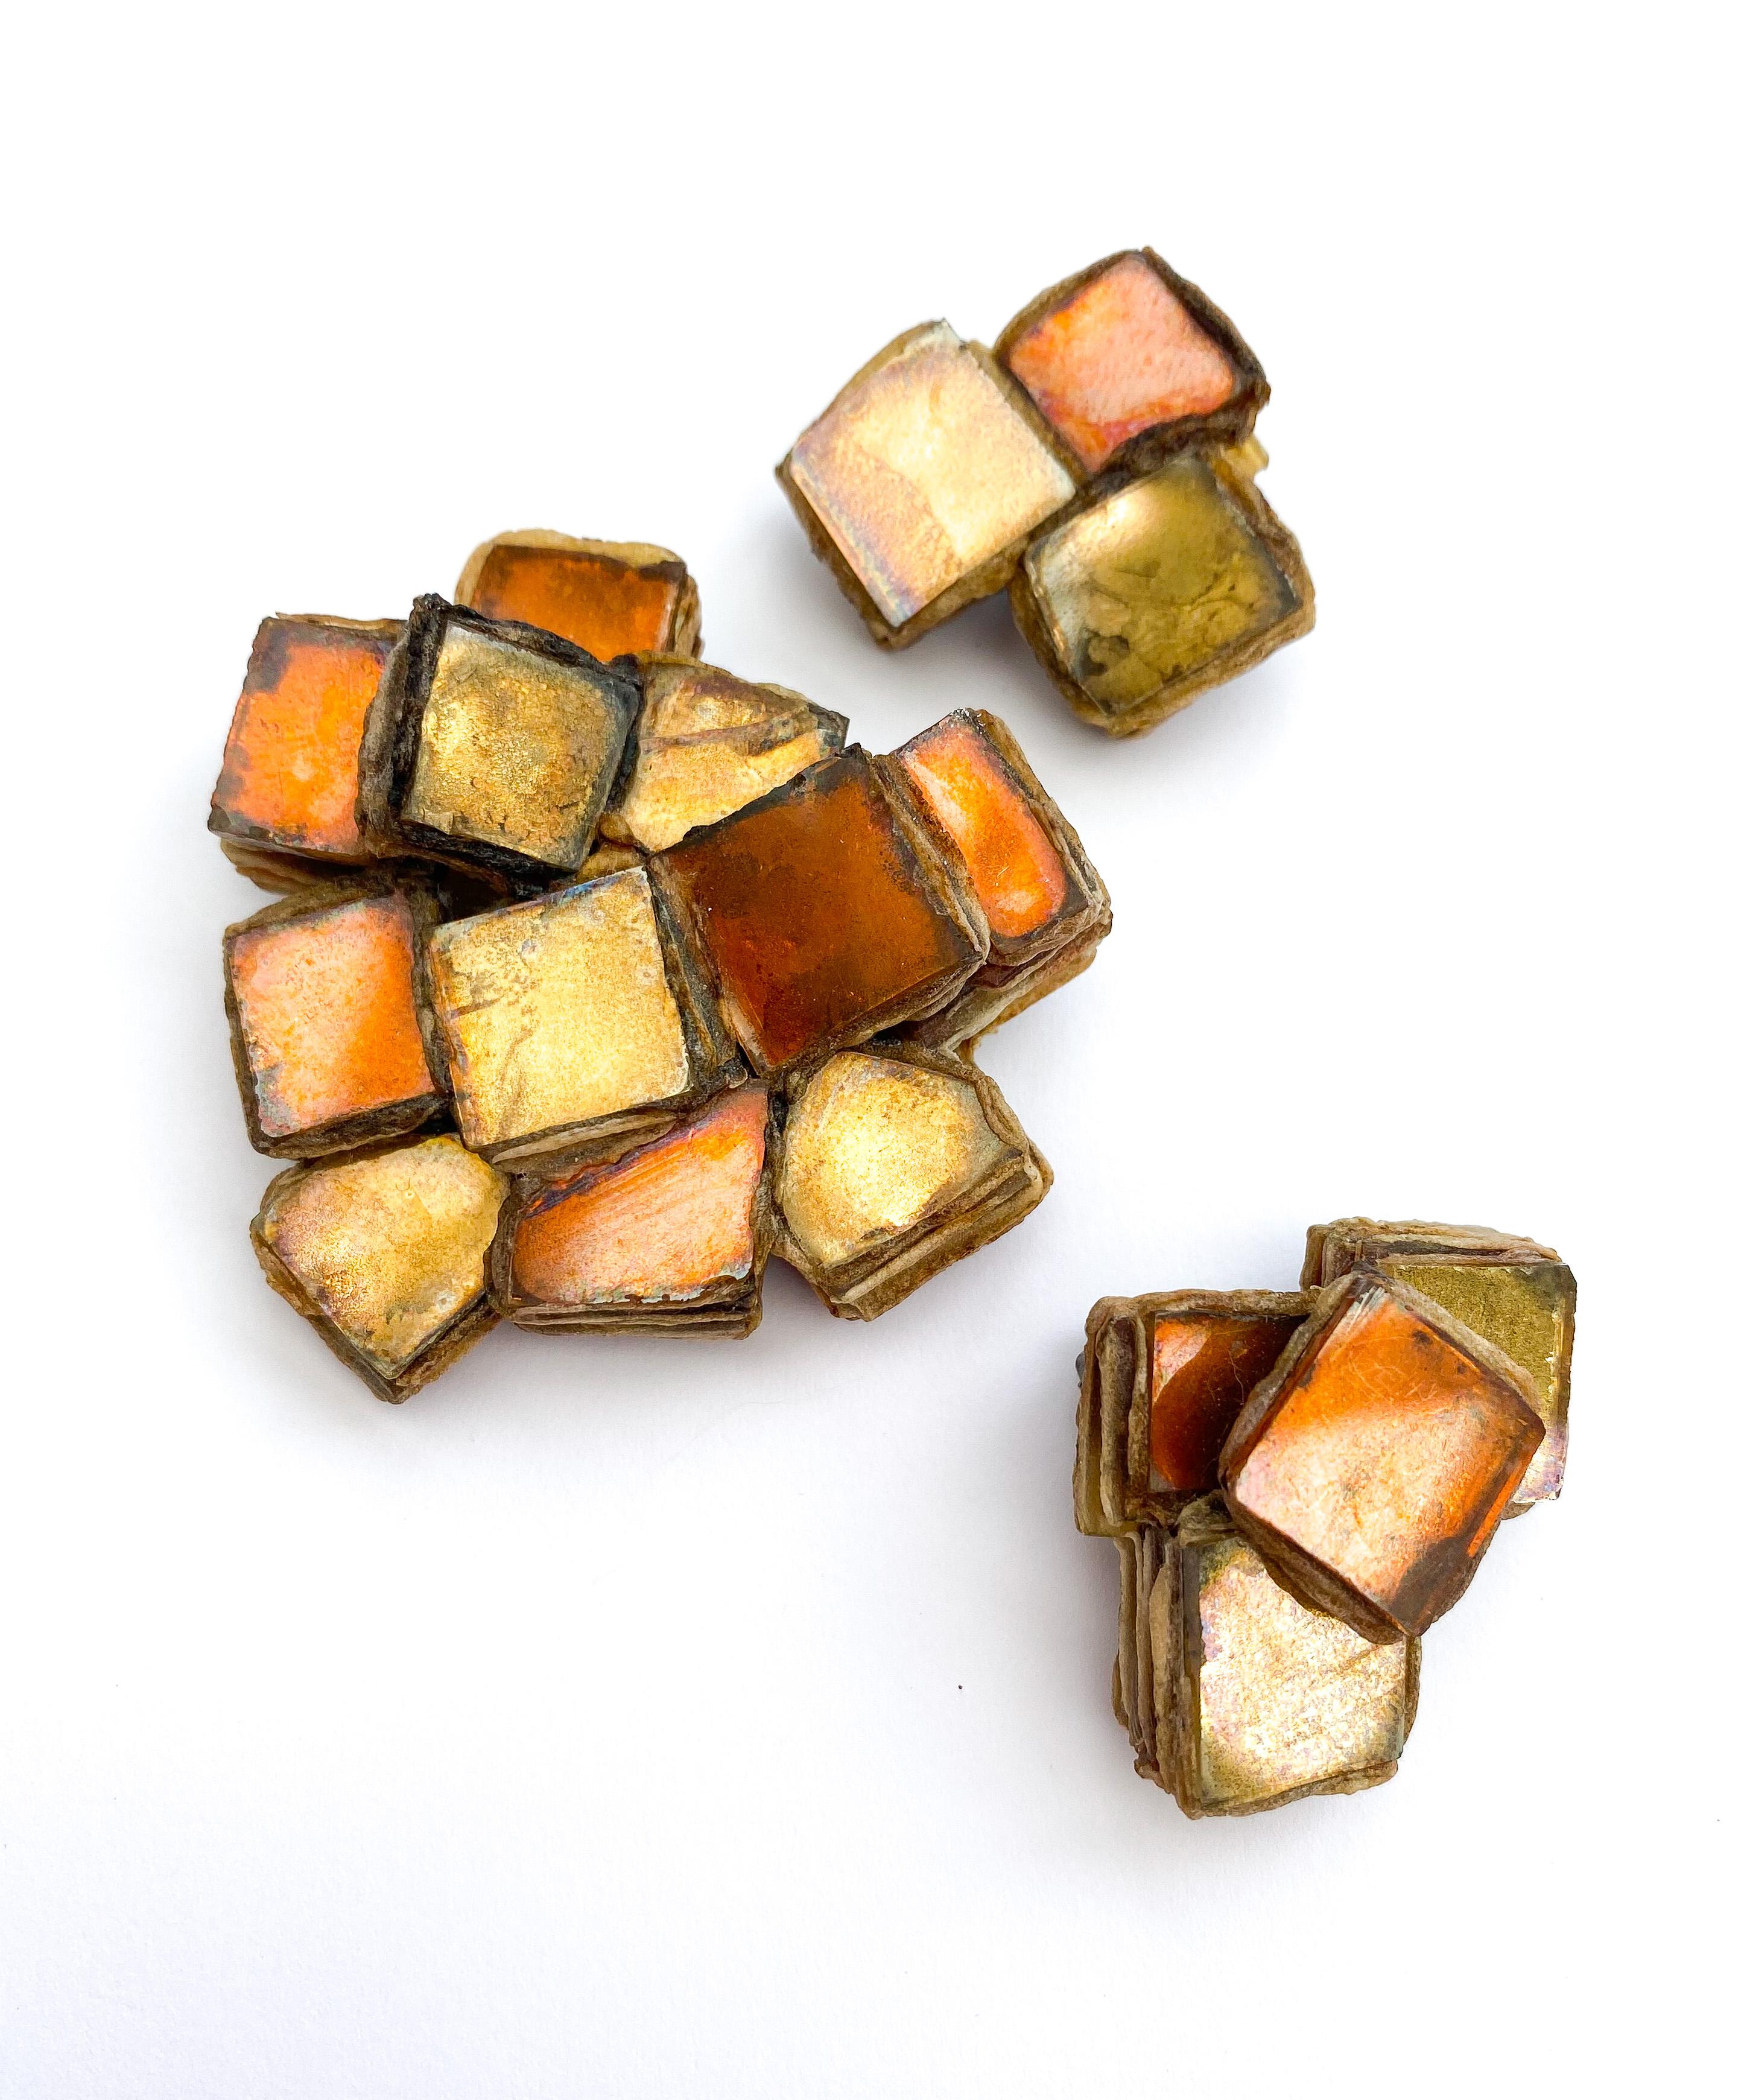 This Talousel and mirrored glass brooch and earrings is a fine example of the later work of Line Vautrin from the 1960s. A most beautiful and unusual colour, each piece is truly artisan, made and assembled by hand. The delicate mirrored and resin